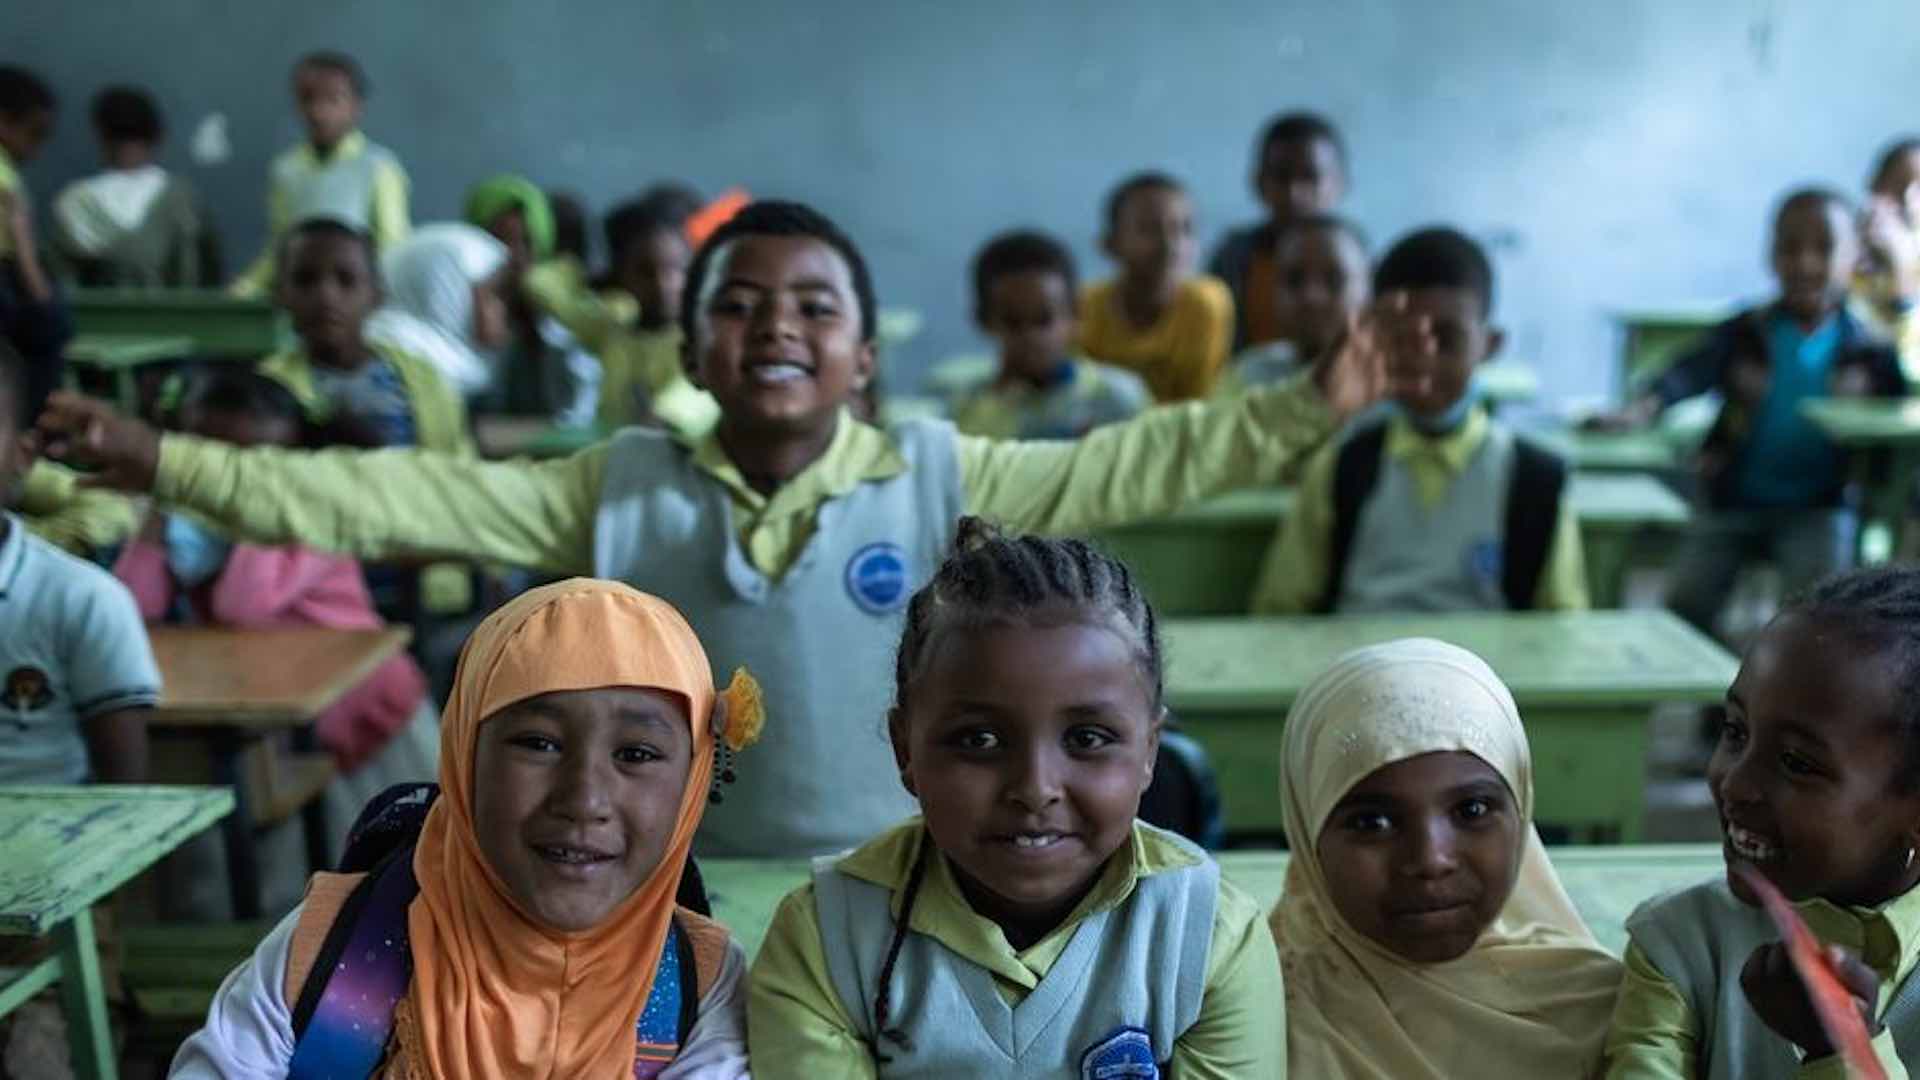 Global education targets hindered by $97 billion funding gap, UNESCO reports